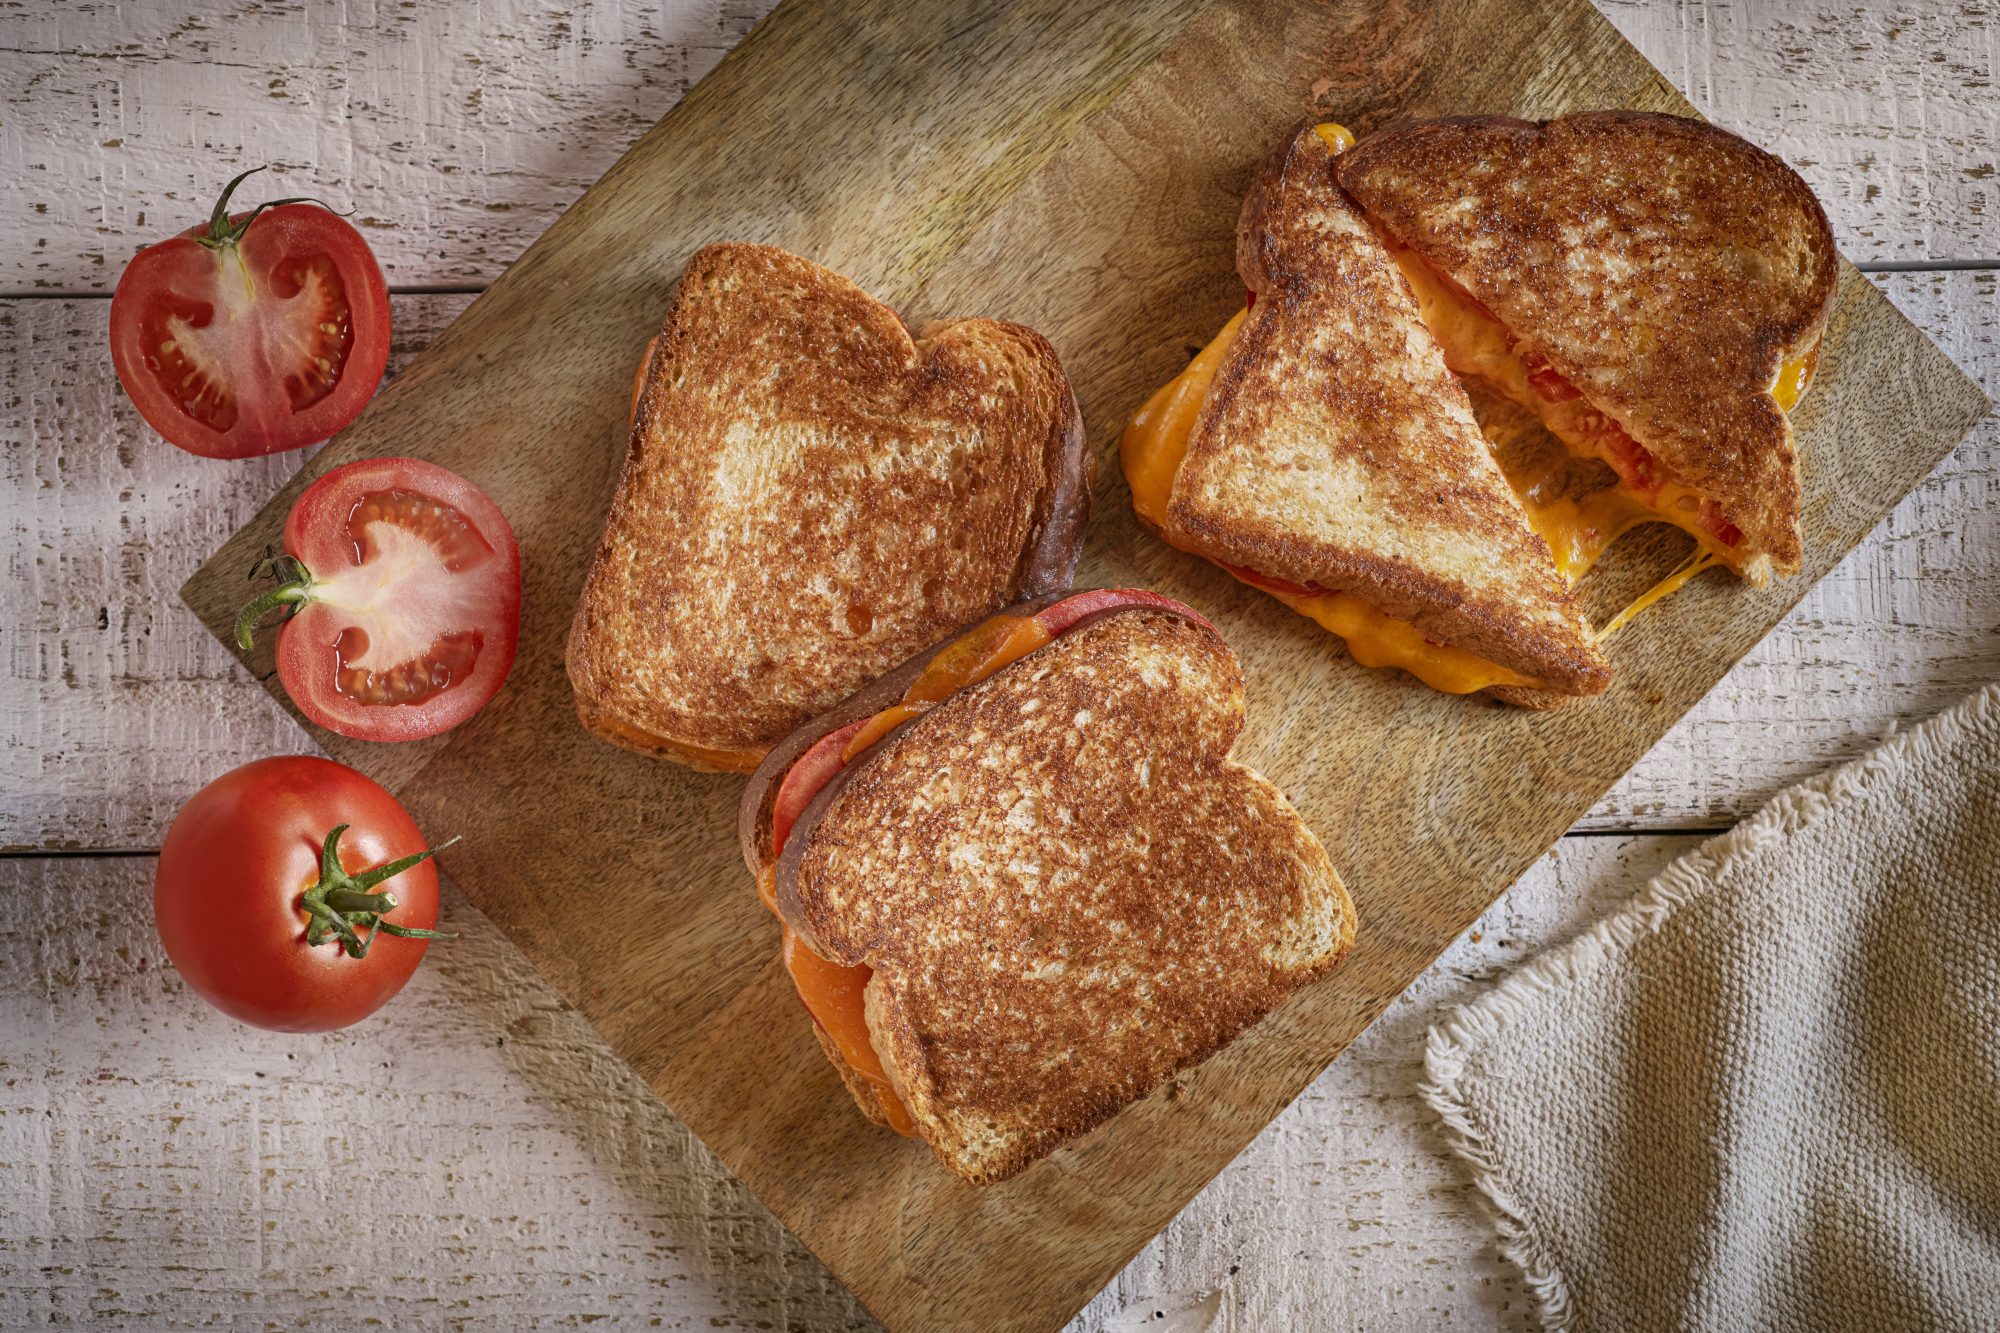 Grilled Cheese and Tomato Sandwiches